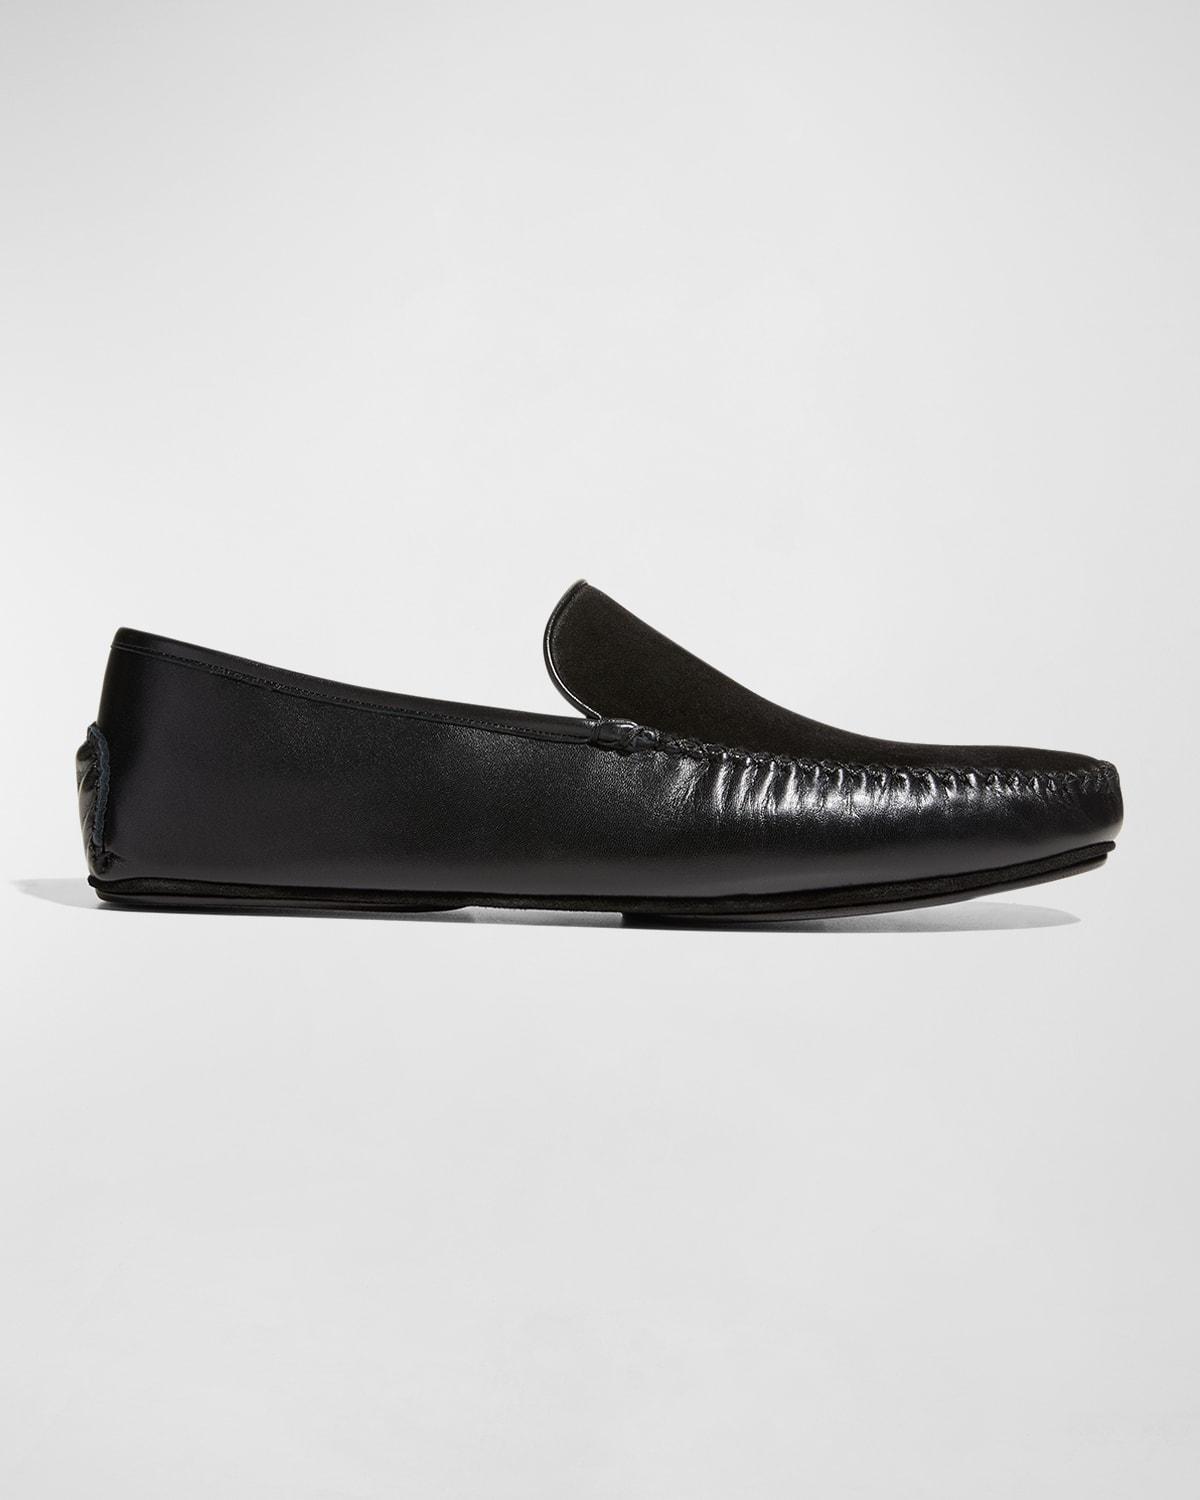 Mens Mayfair Suede-Leather Loafers Product Image